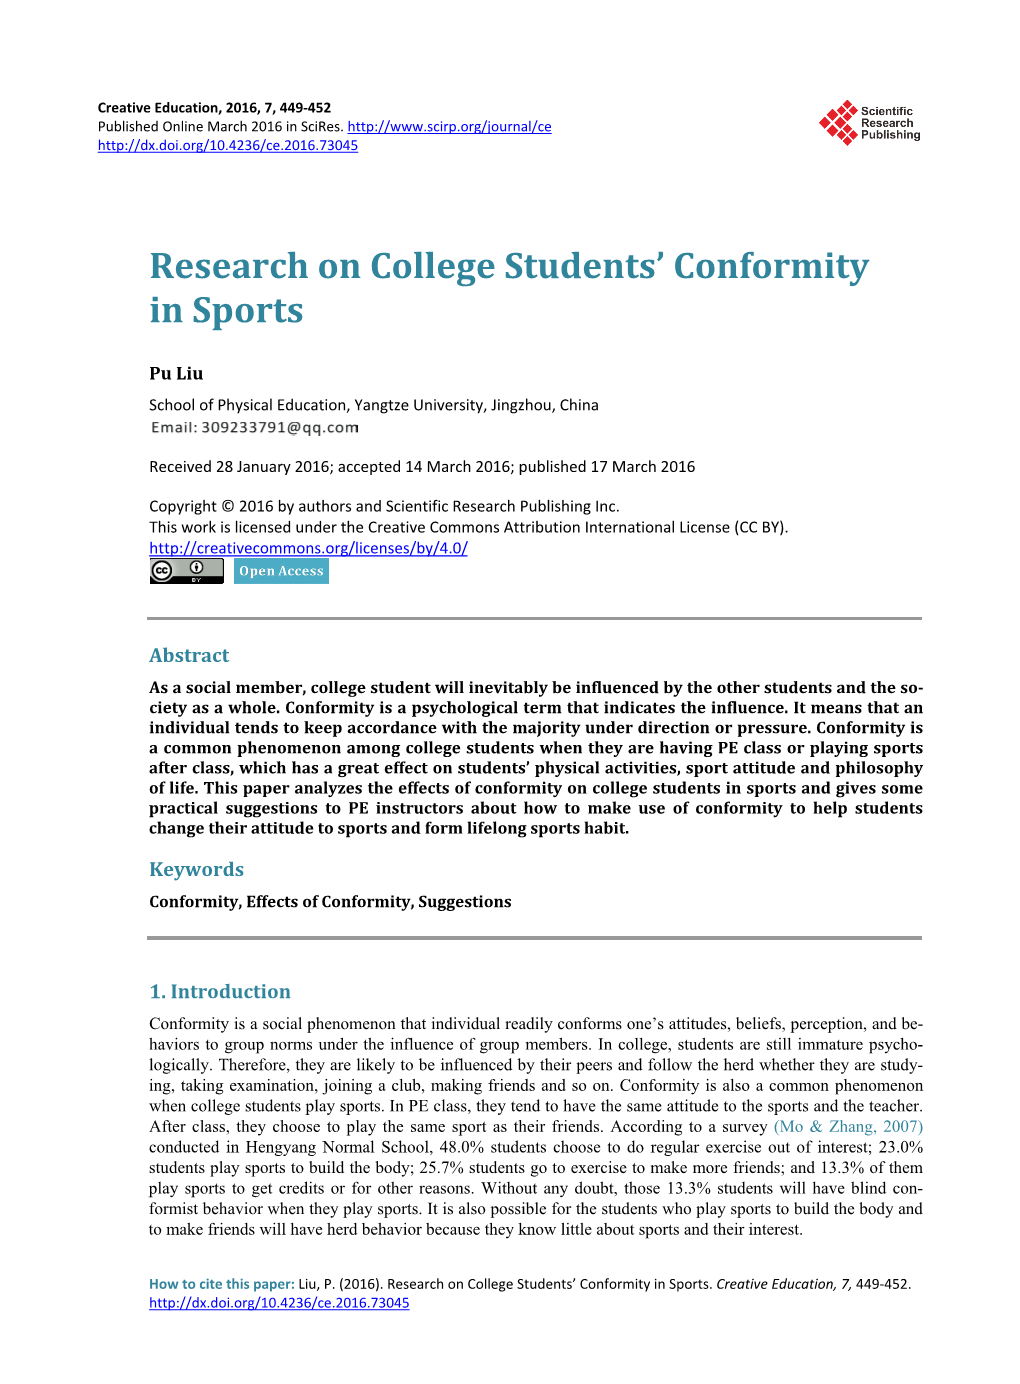 Research on College Students' Conformity in Sports